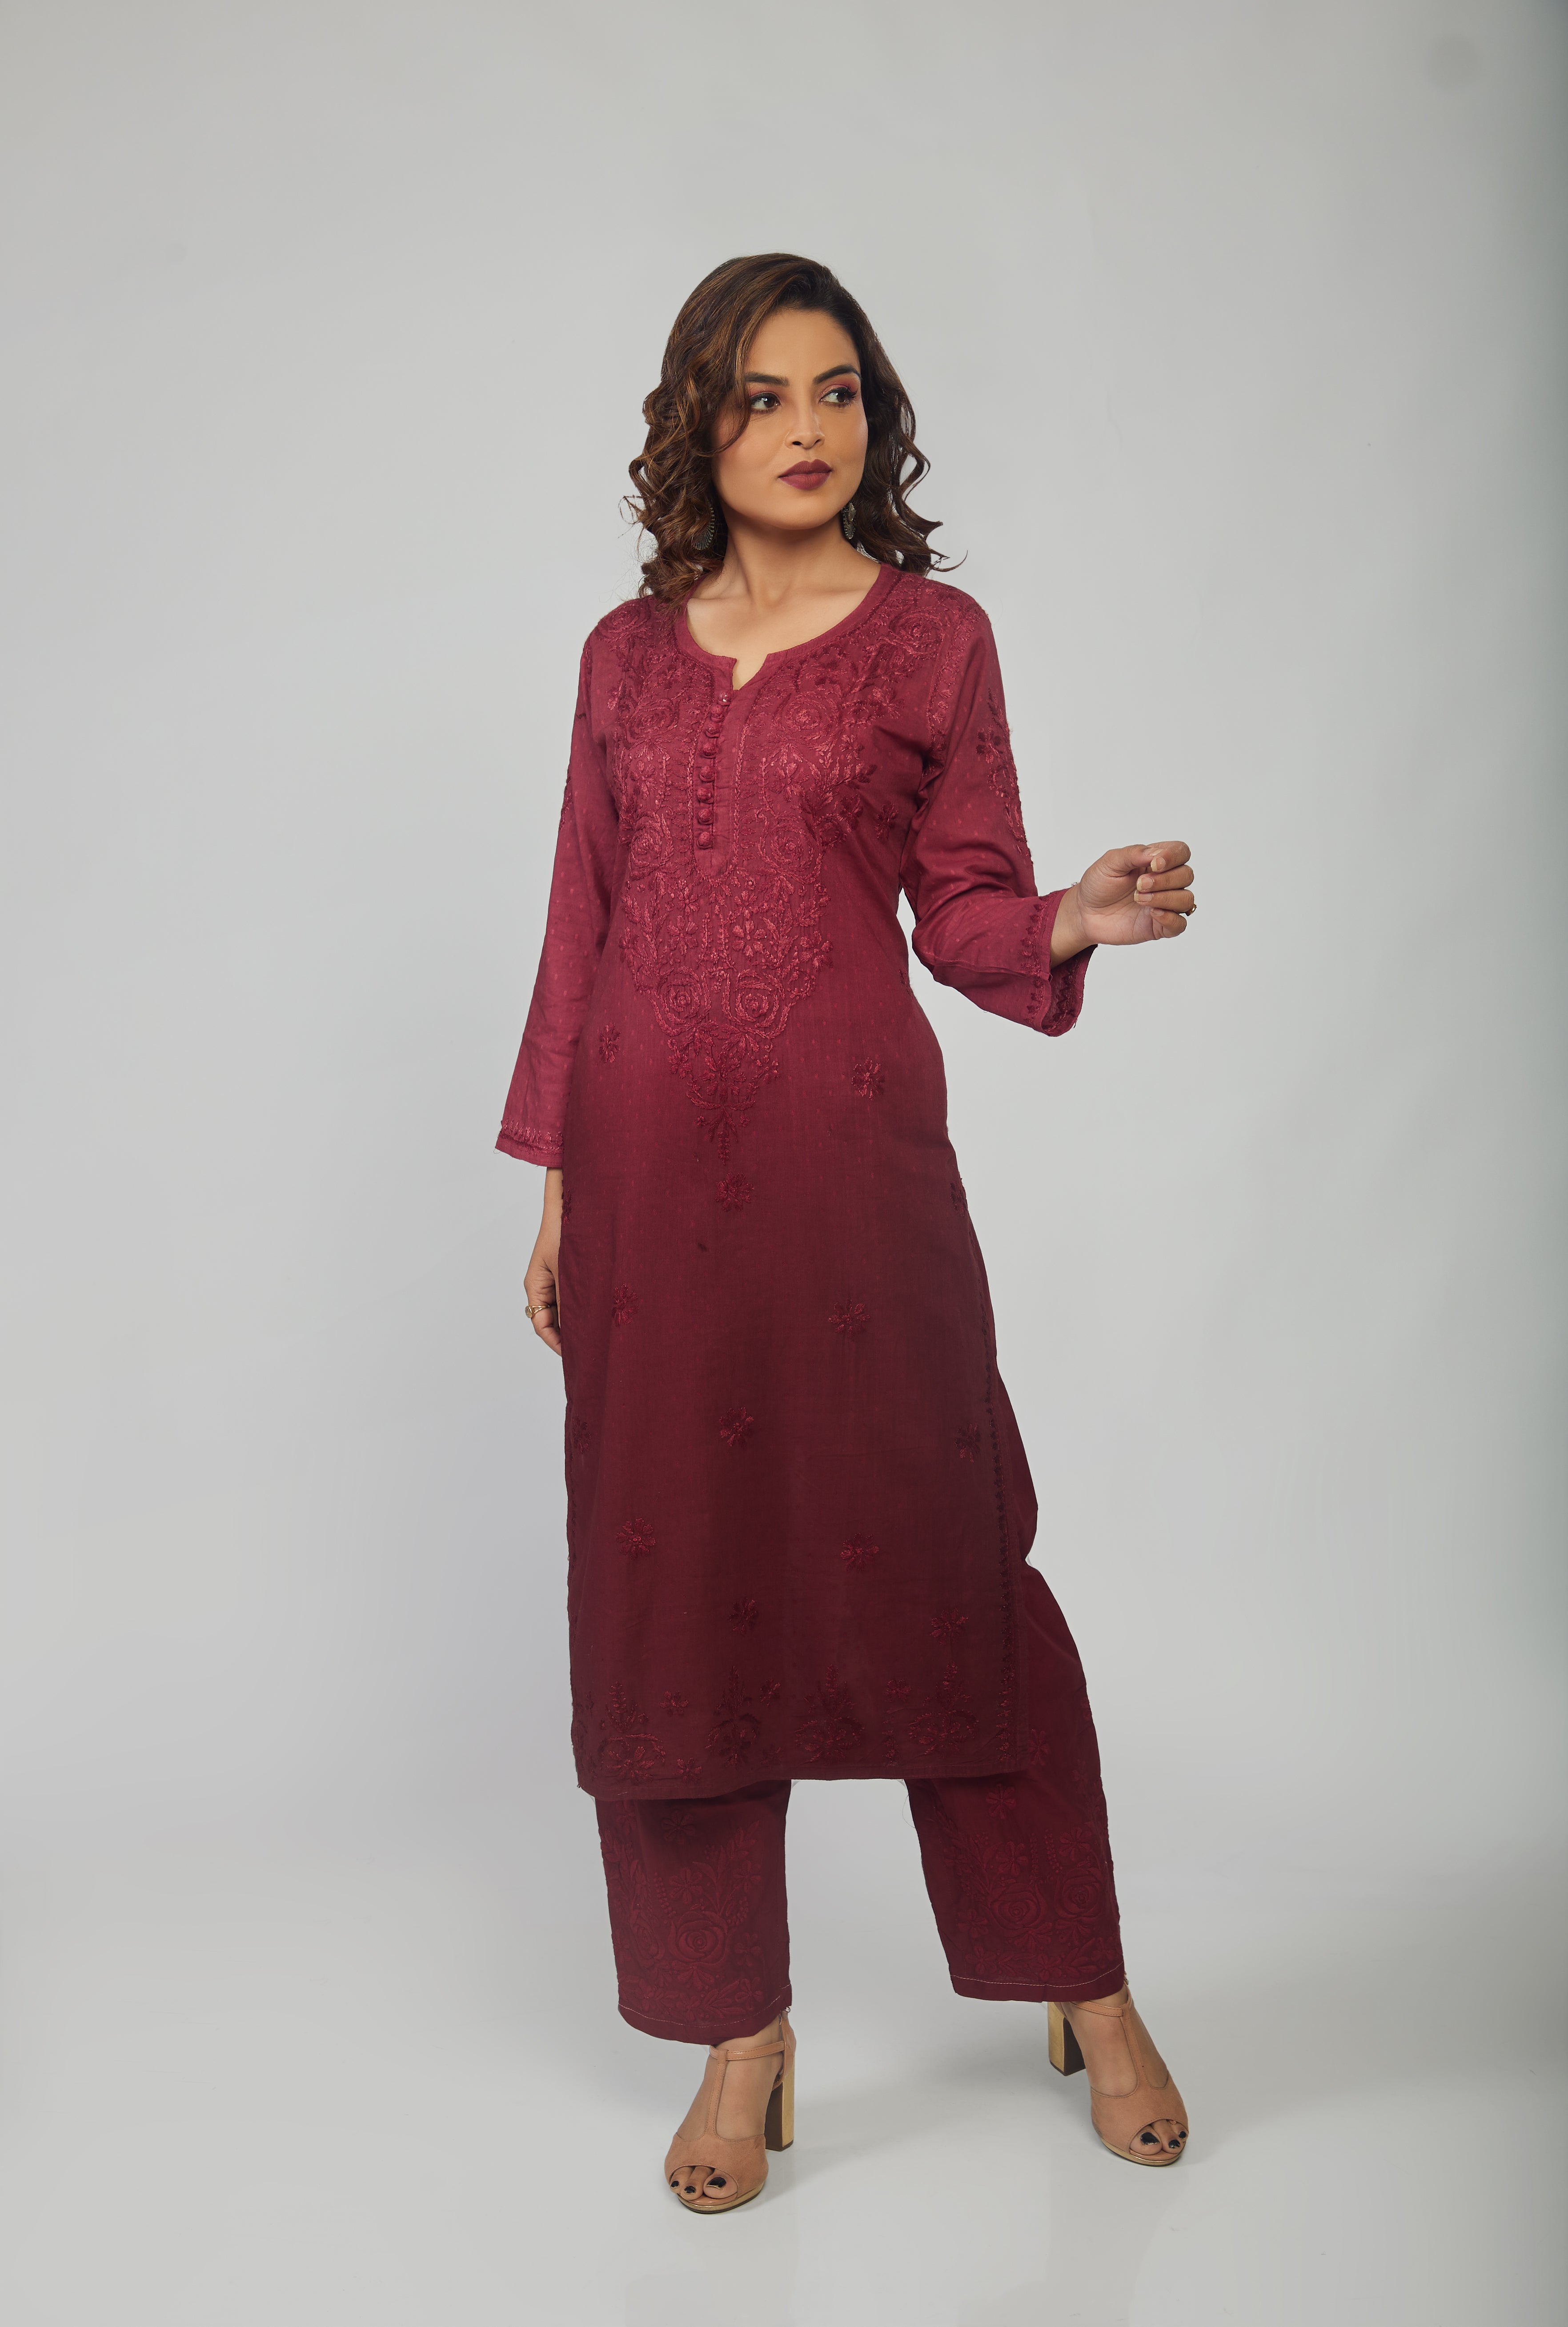 Shop Kurti Palazzo Set for Women Online from India's Luxury Designers 2024